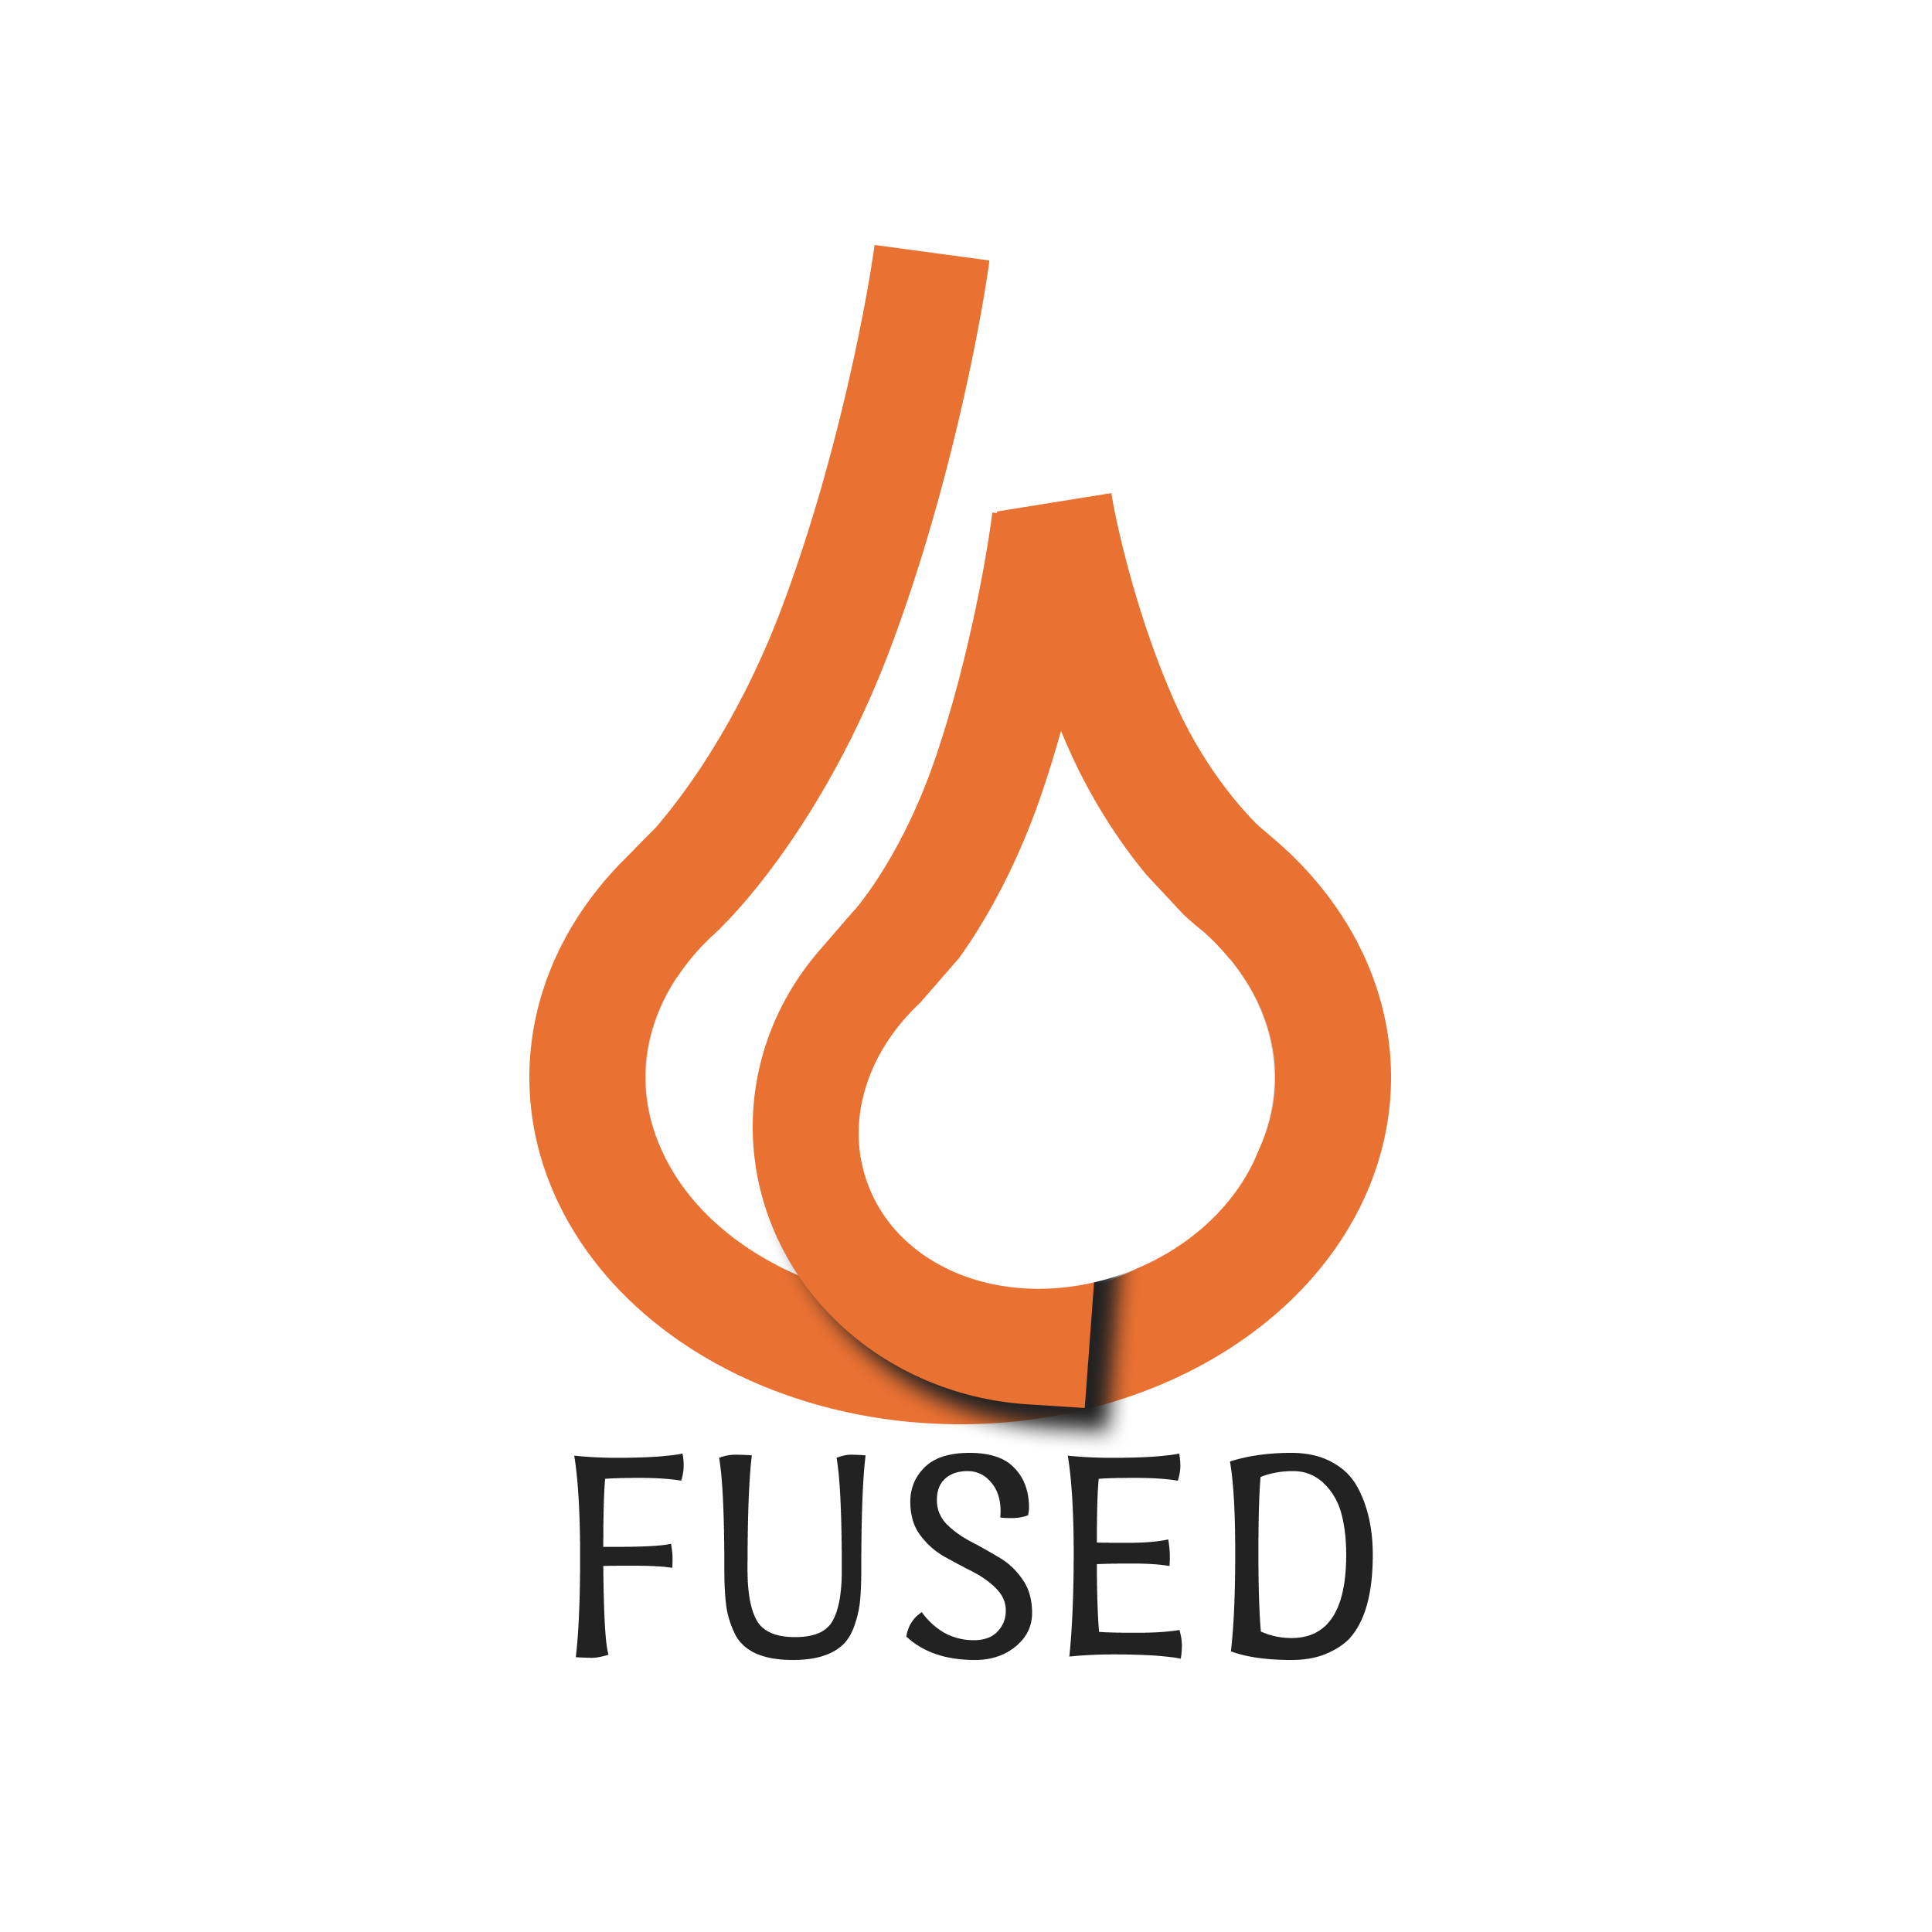 FUSED project logo